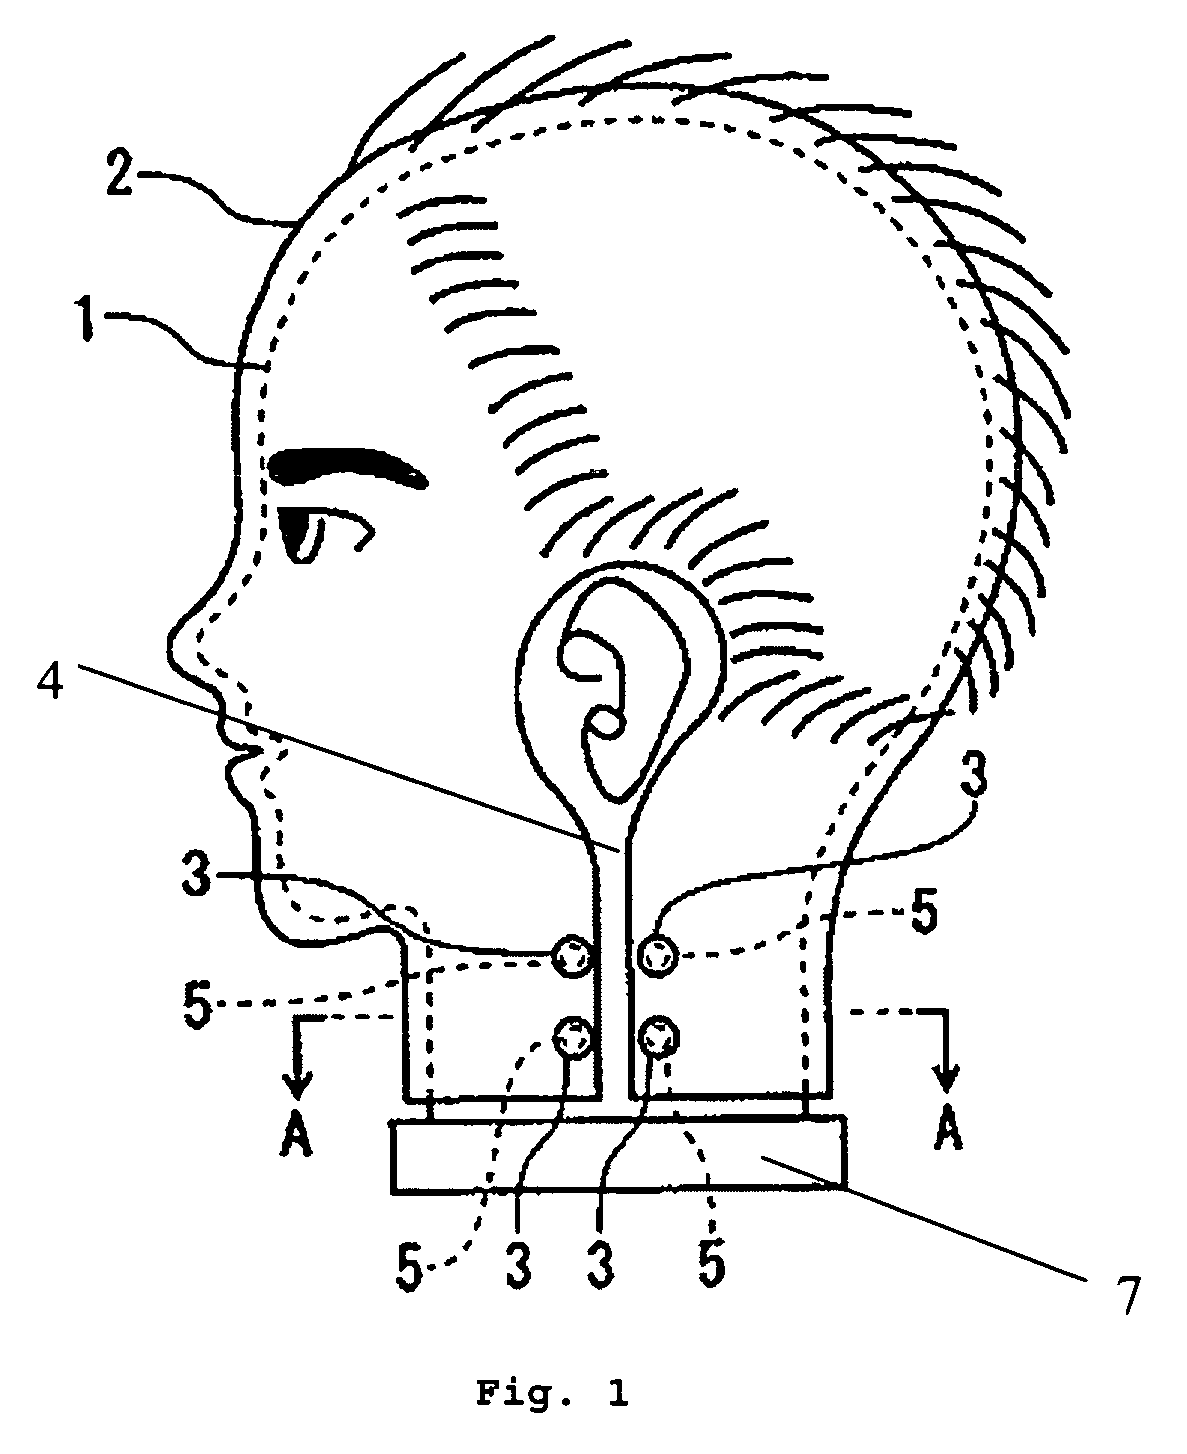 Head model for hairdressing and beauty training